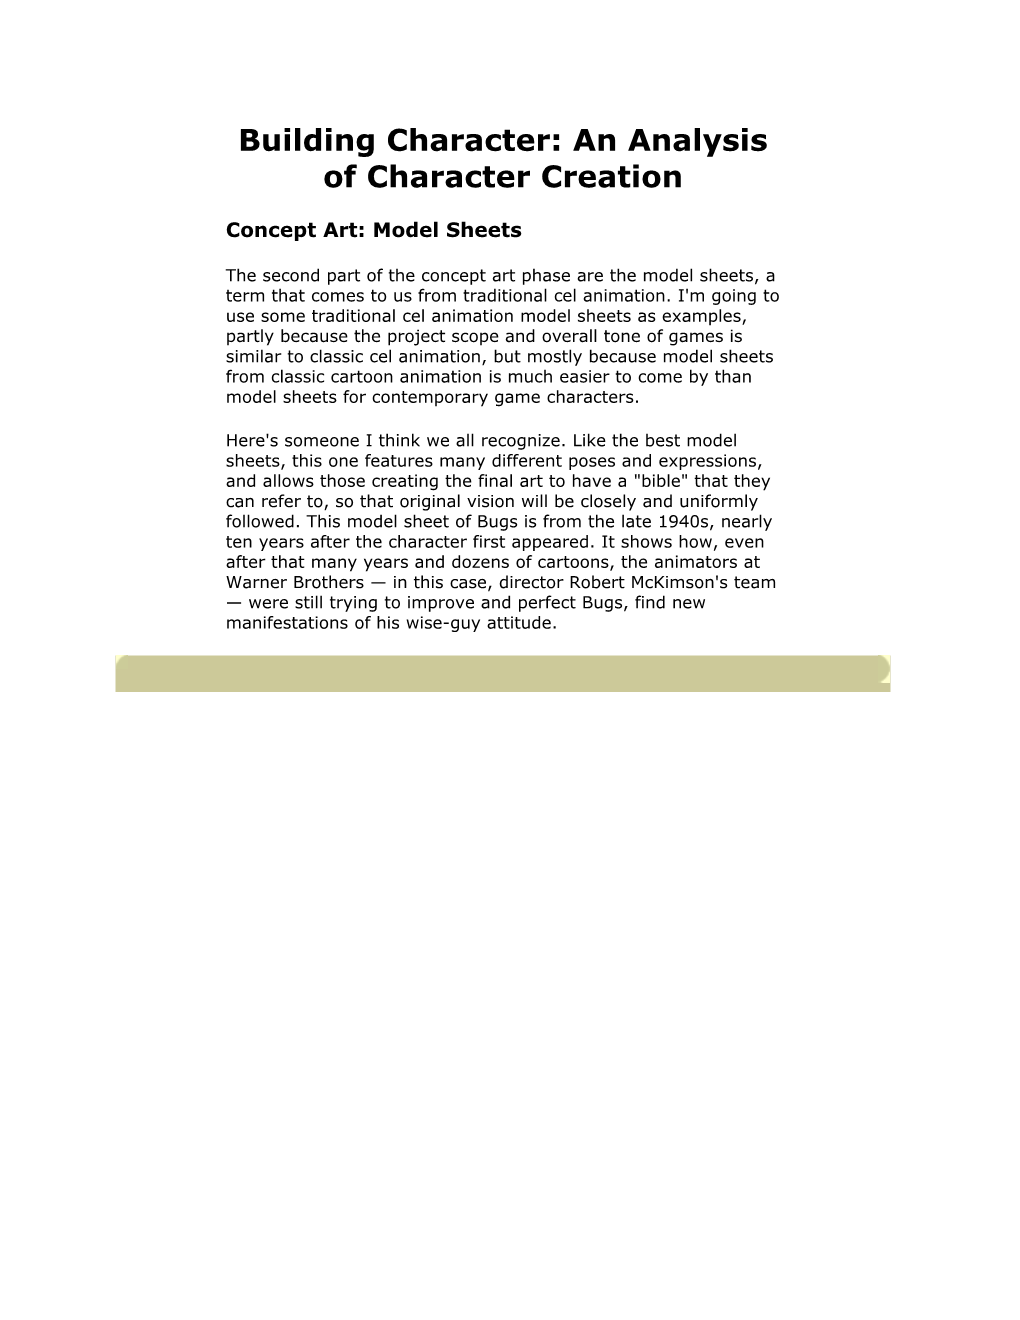 Building Character: an Analysis of Character Creation